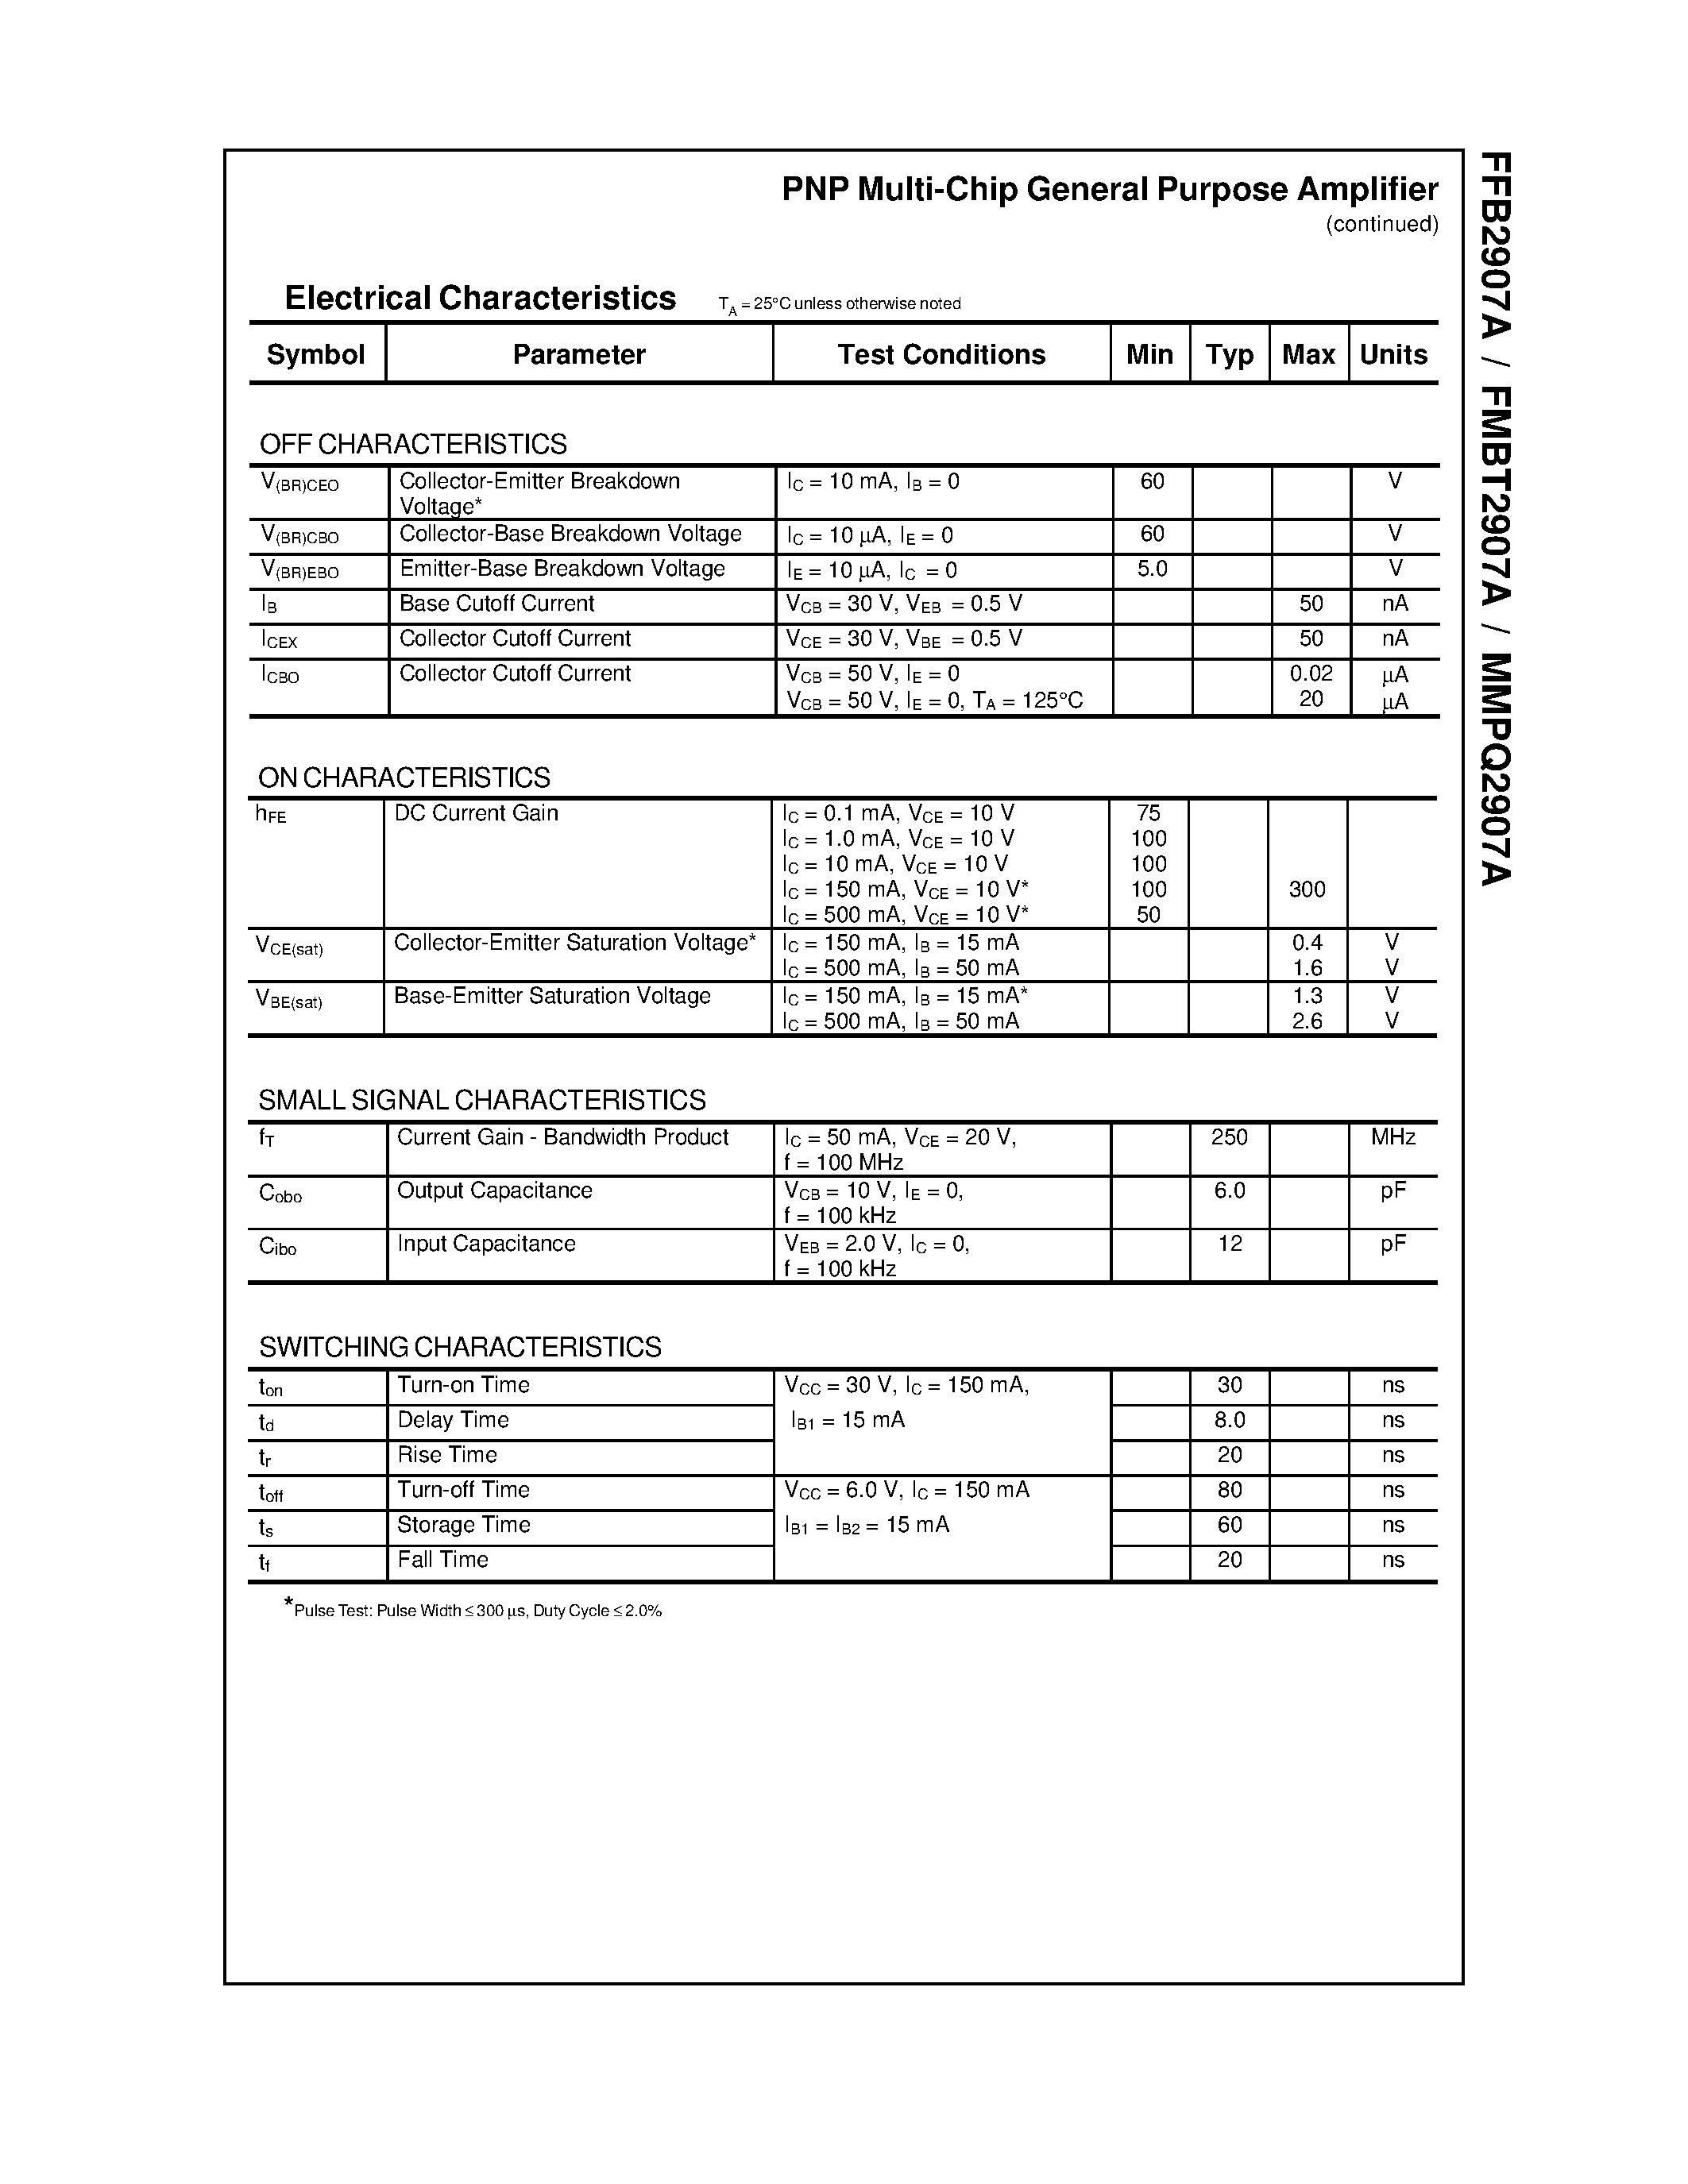 Datasheet FMB2907A - PNP Multi-Chip General Purpose Amplifier page 2